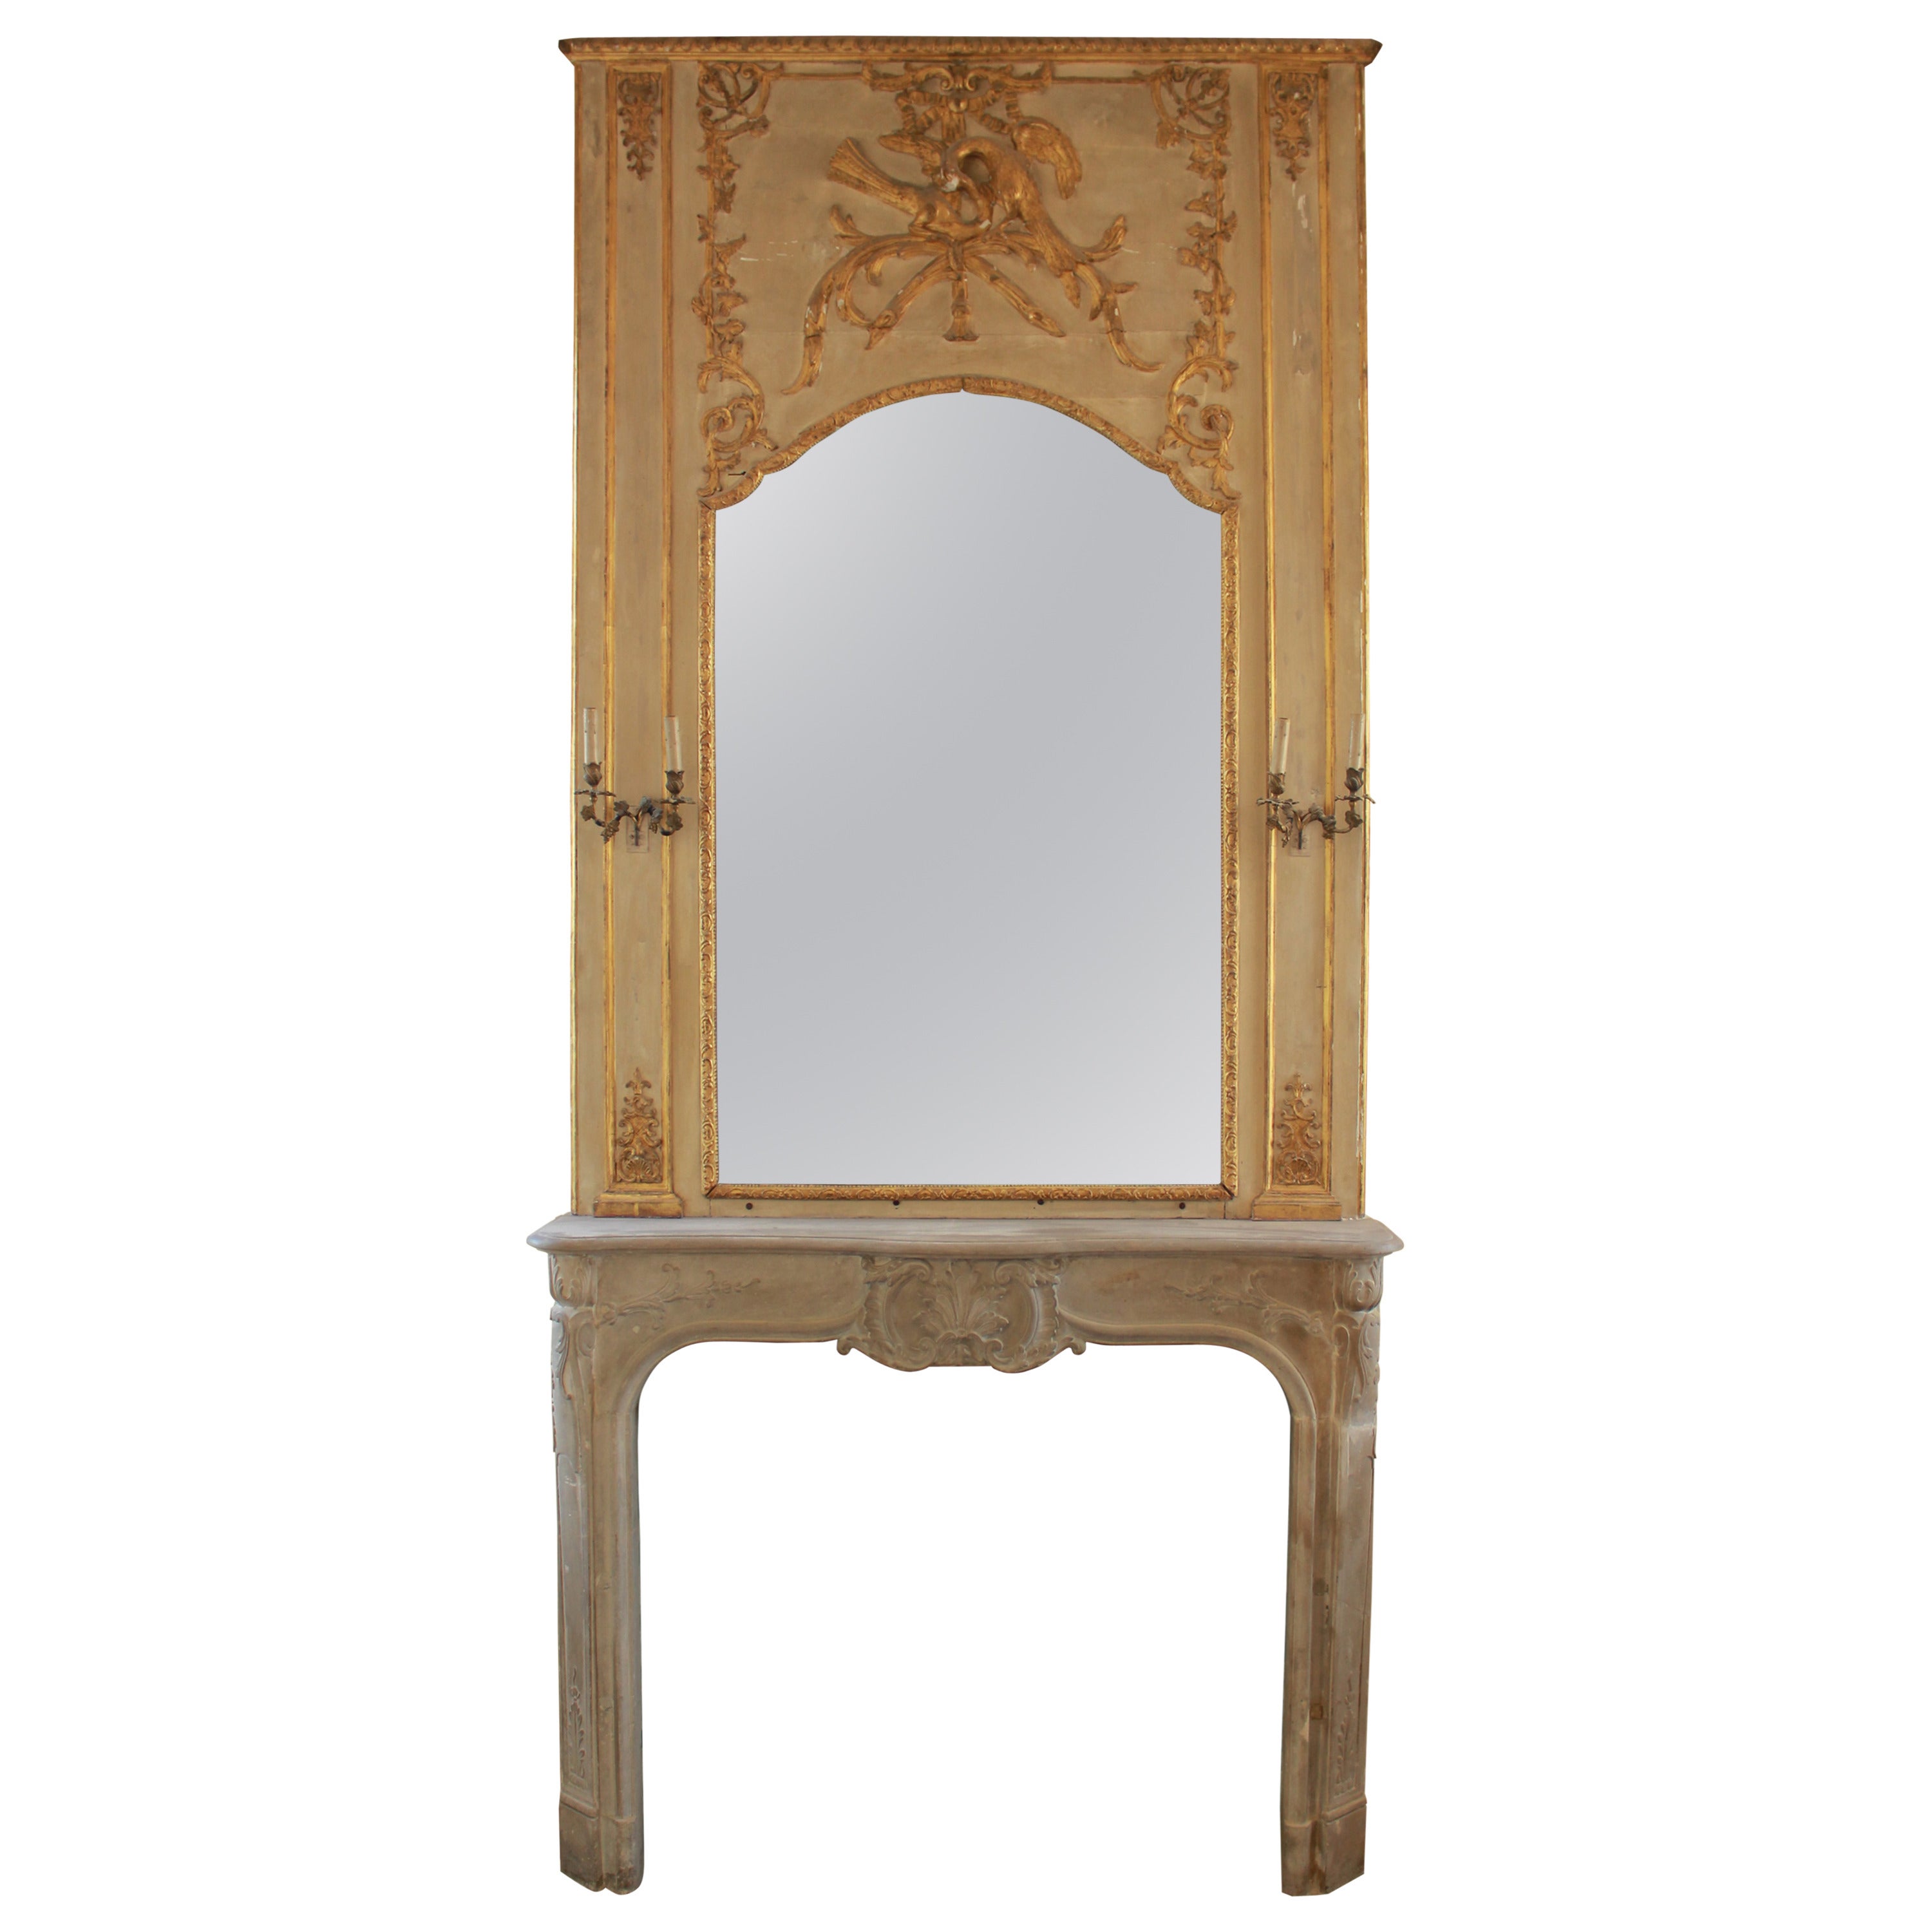 1925 Limestone Mantel with Large Gilded Overmantel Mirror and Original Sconces